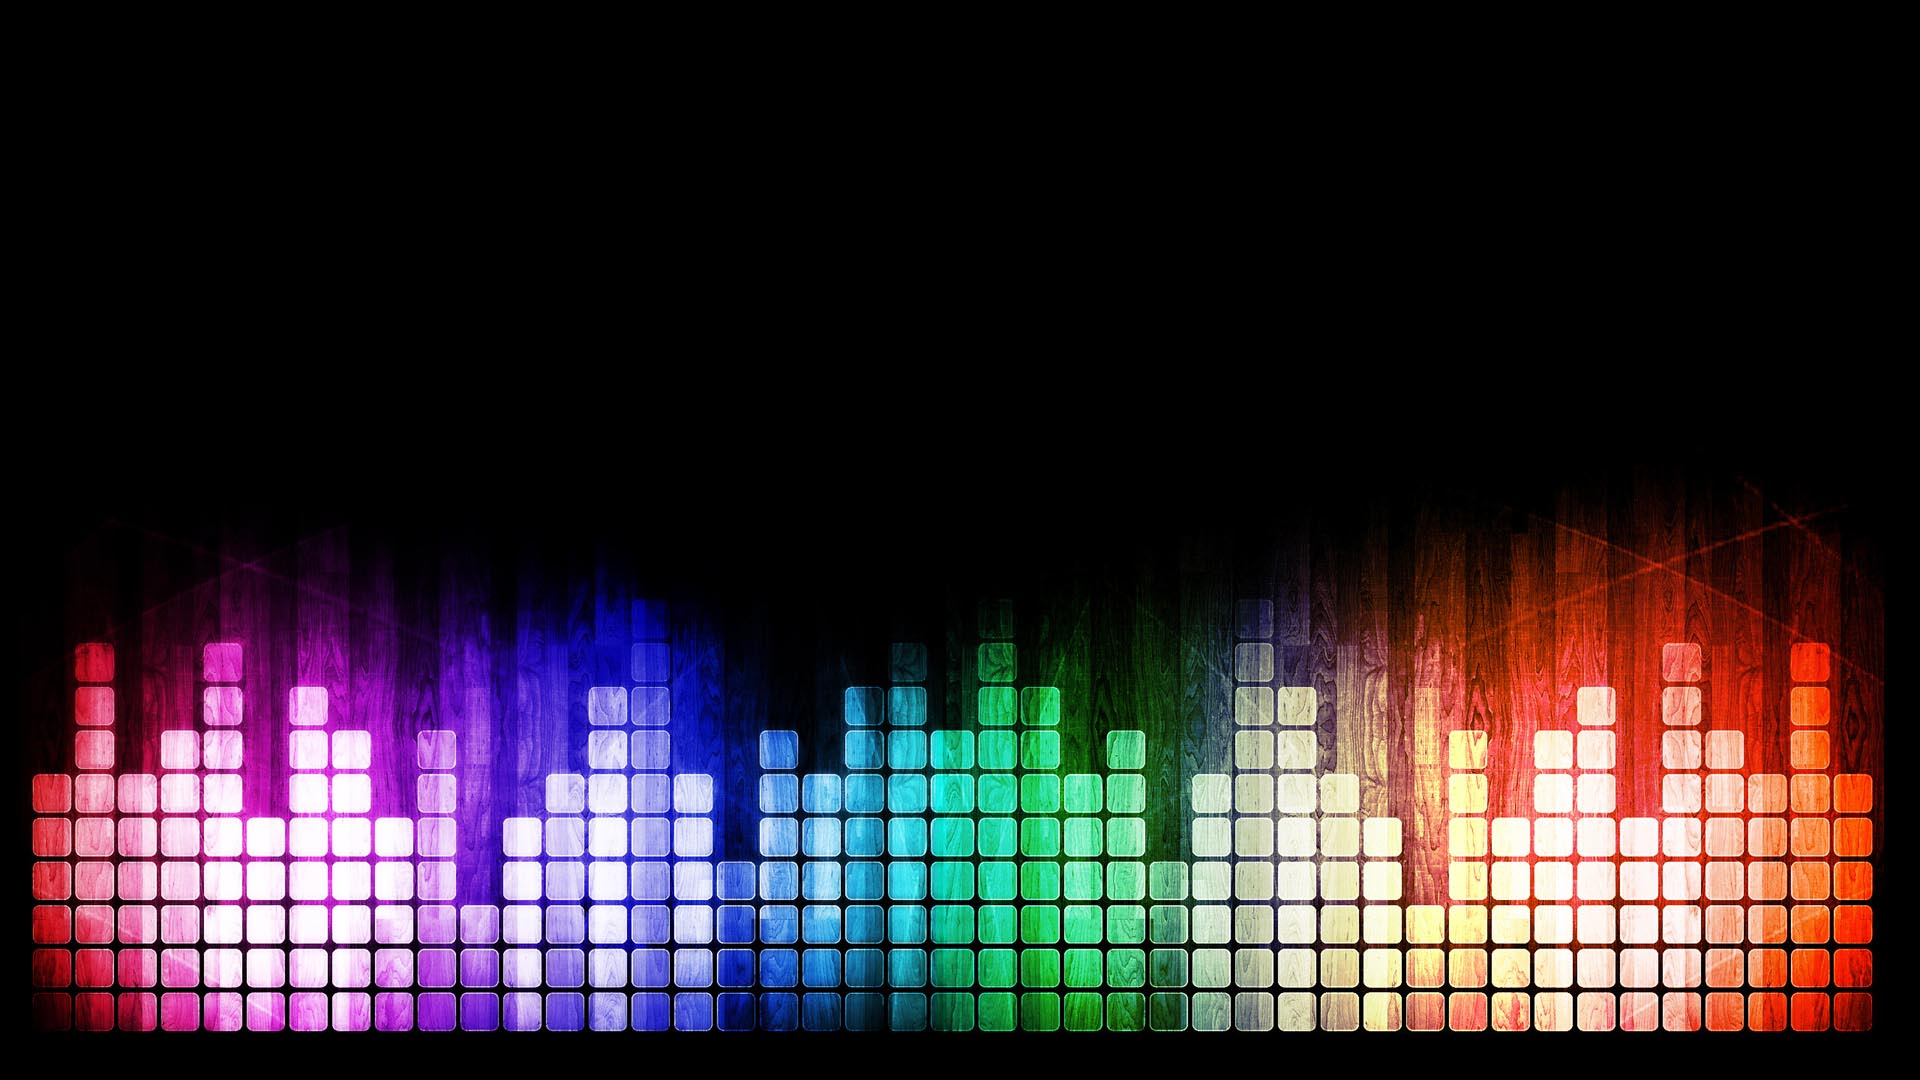 Music Vector Art Wallpaper HD Pictures In High Definition Or